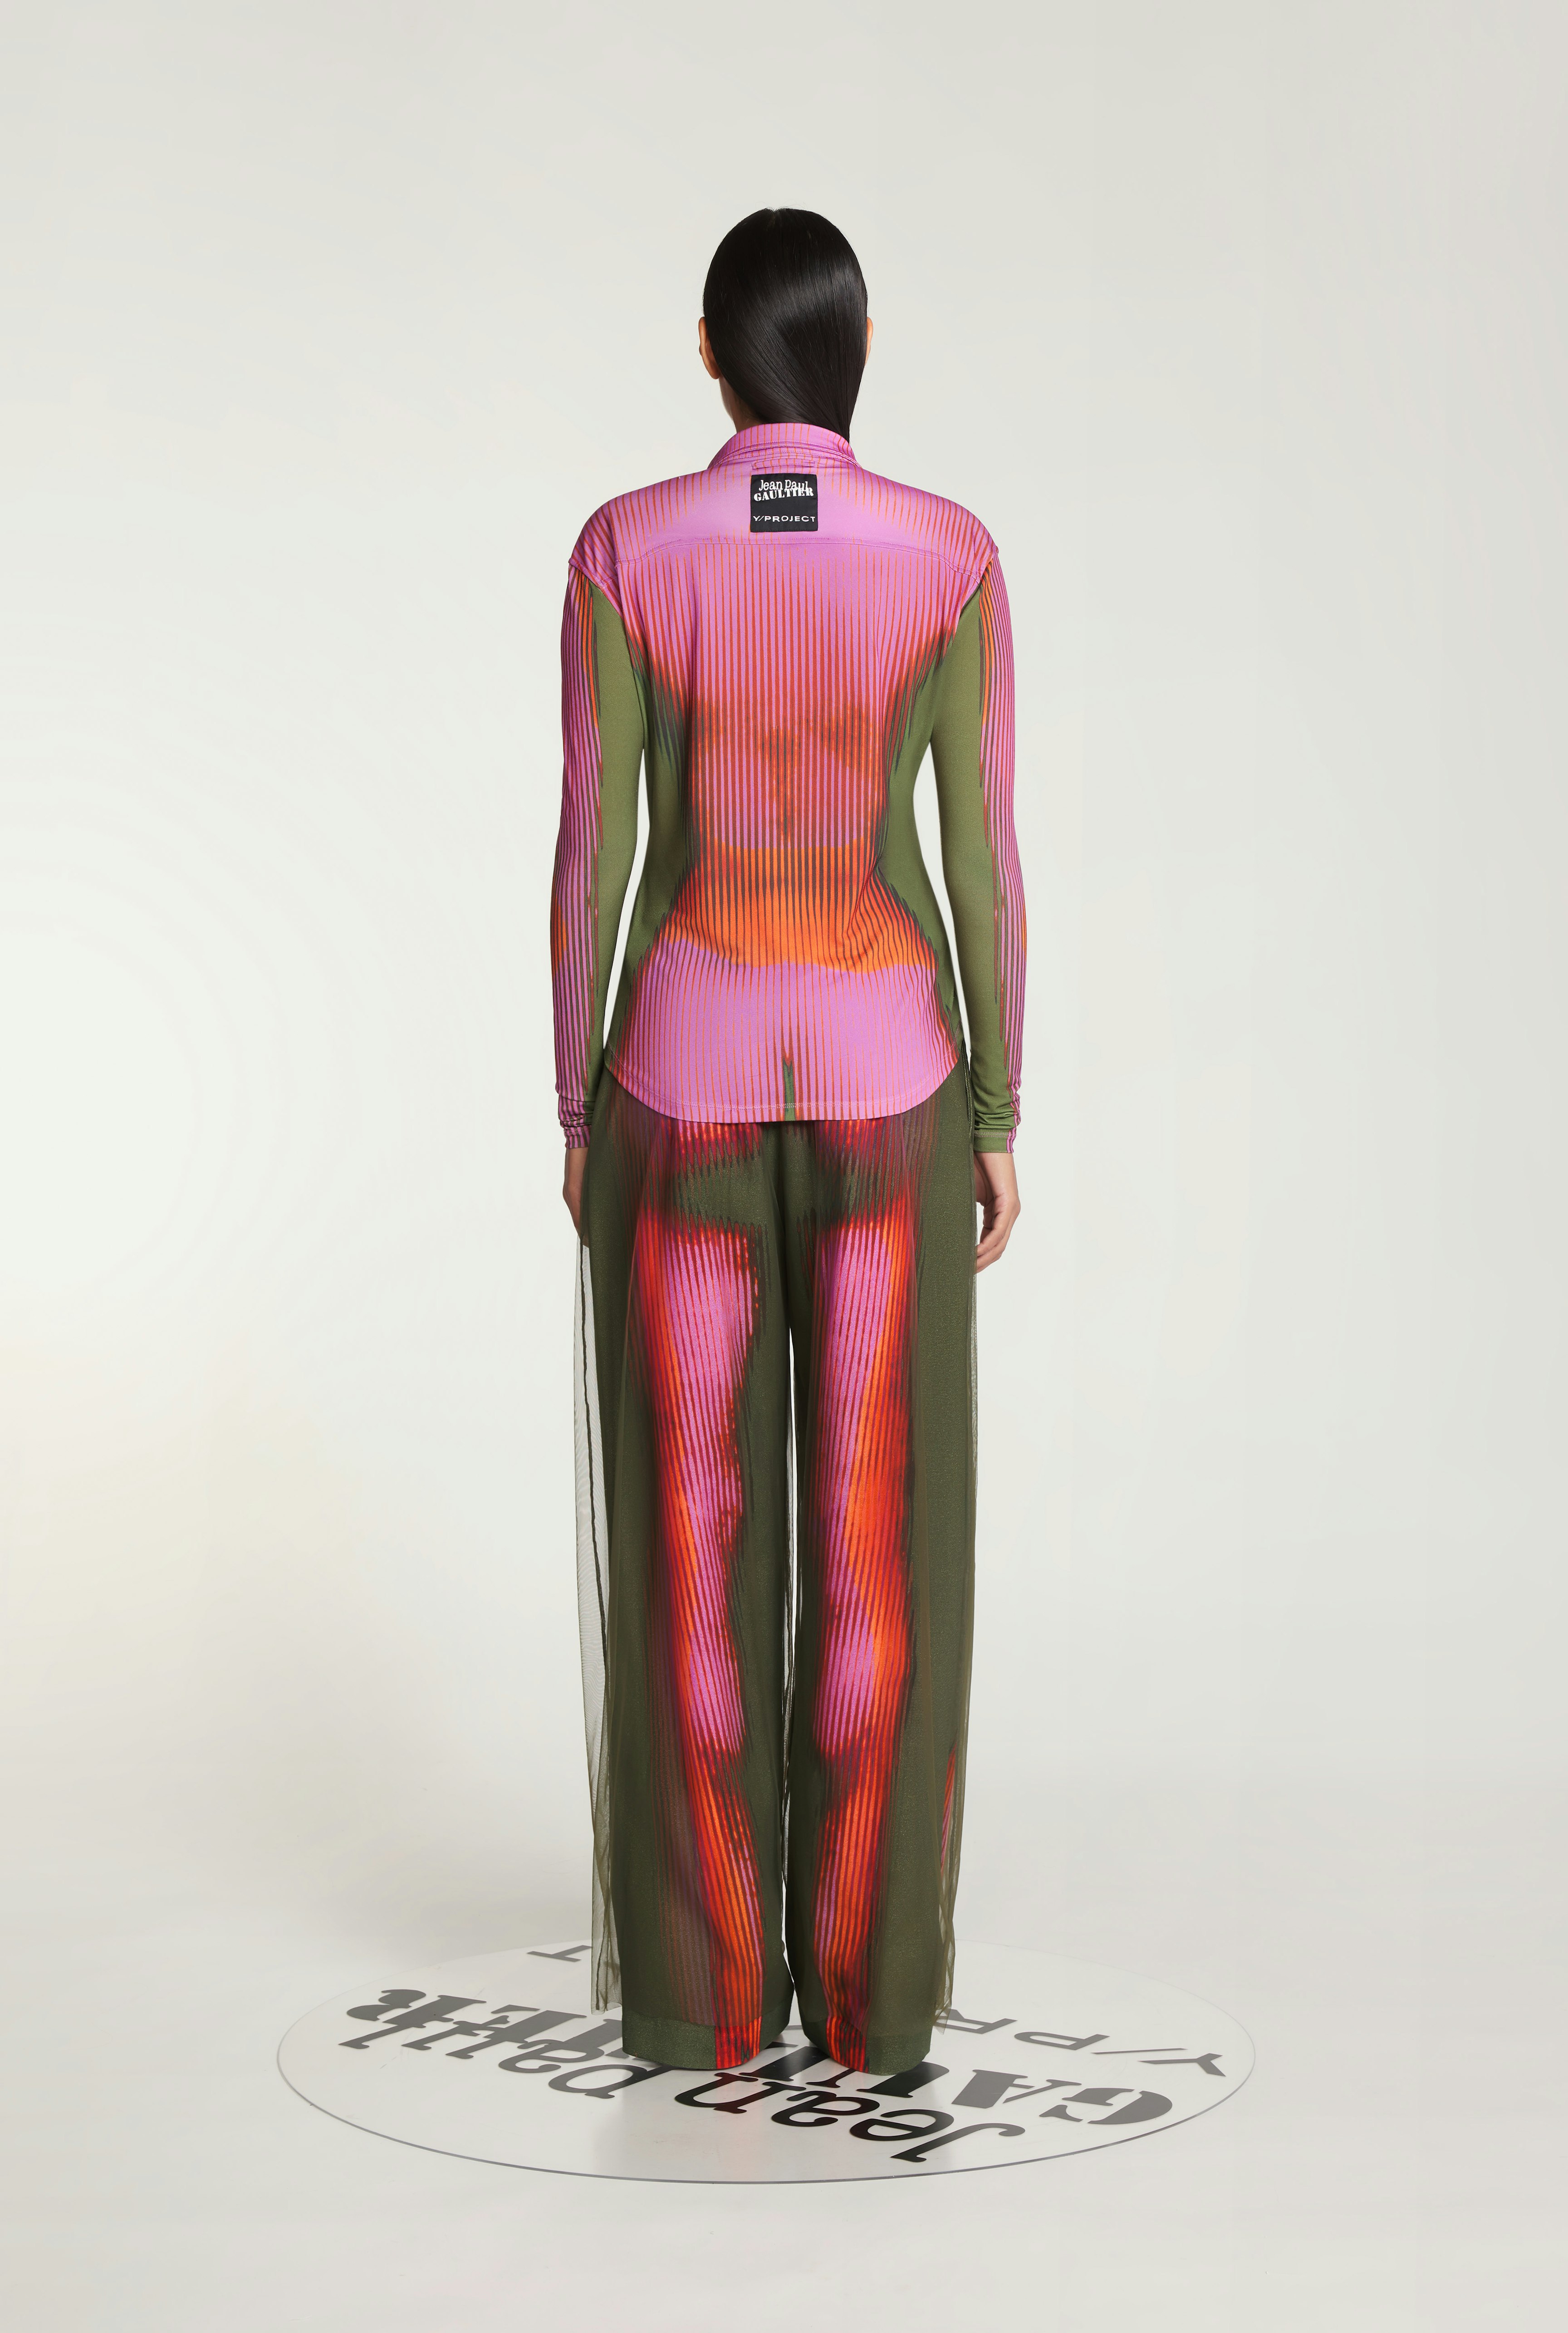 The Pink & Khaki Body Morph Shirt by Jean Paul Gaultier x Y/Project